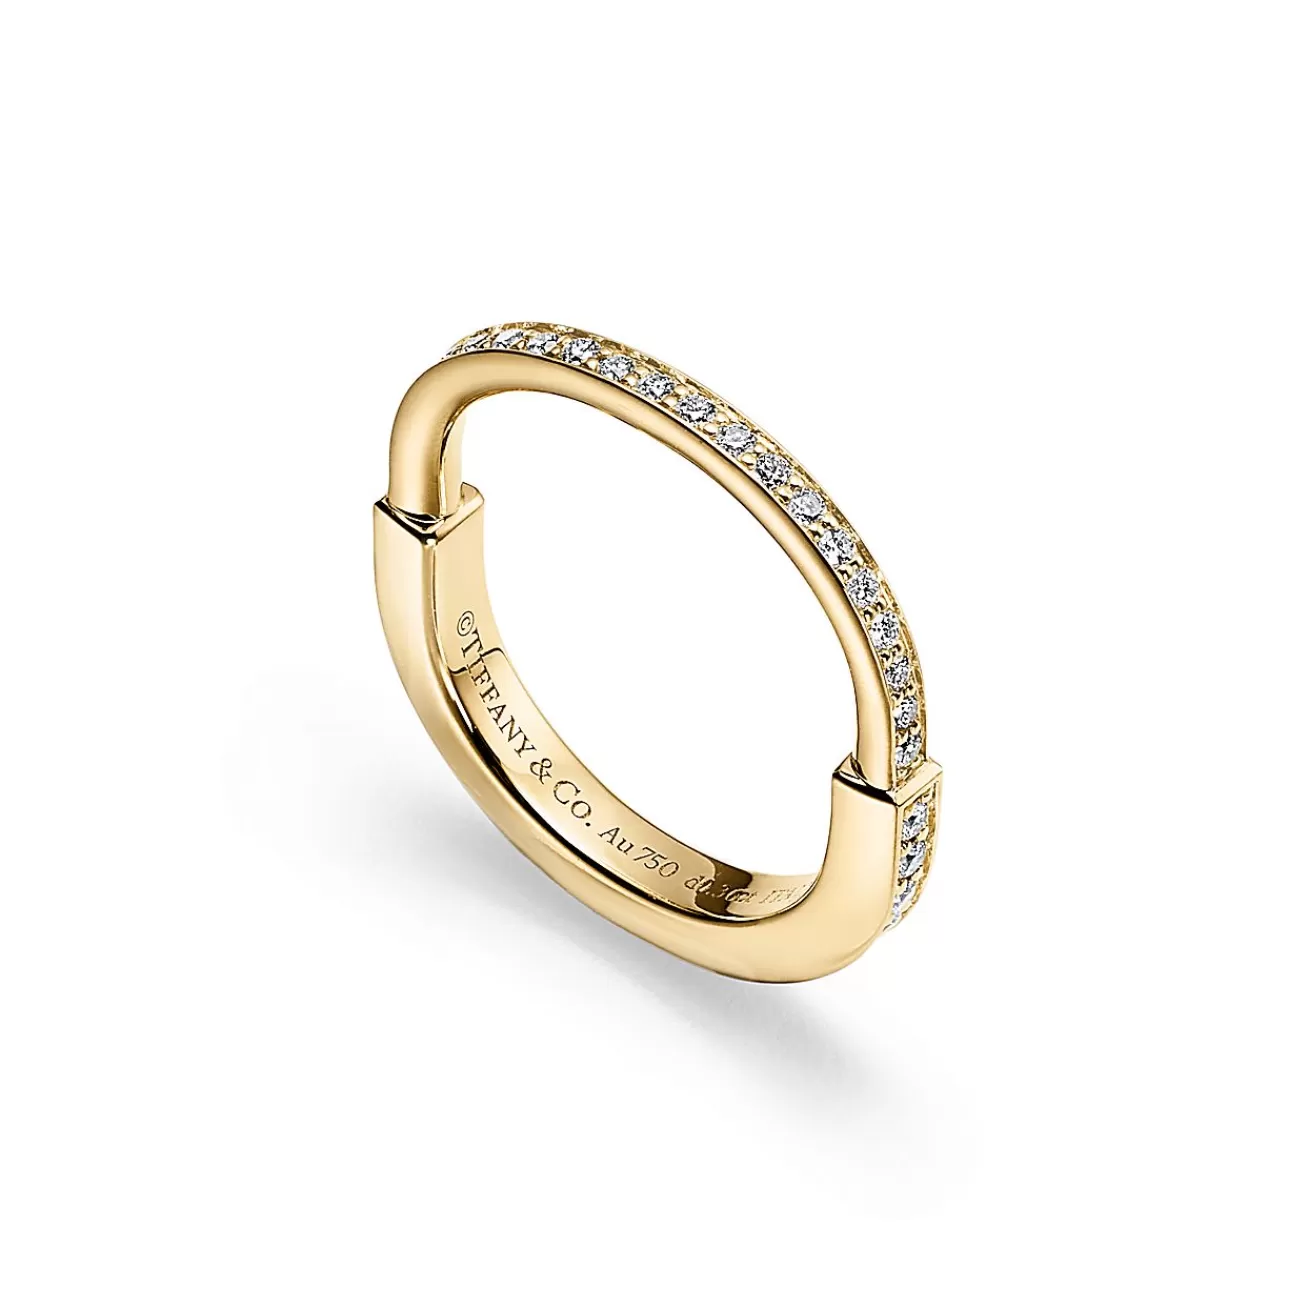 Tiffany & Co. Tiffany Lock Ring in Yellow Gold with Pavé Diamonds | ^ Rings | Stacking Rings